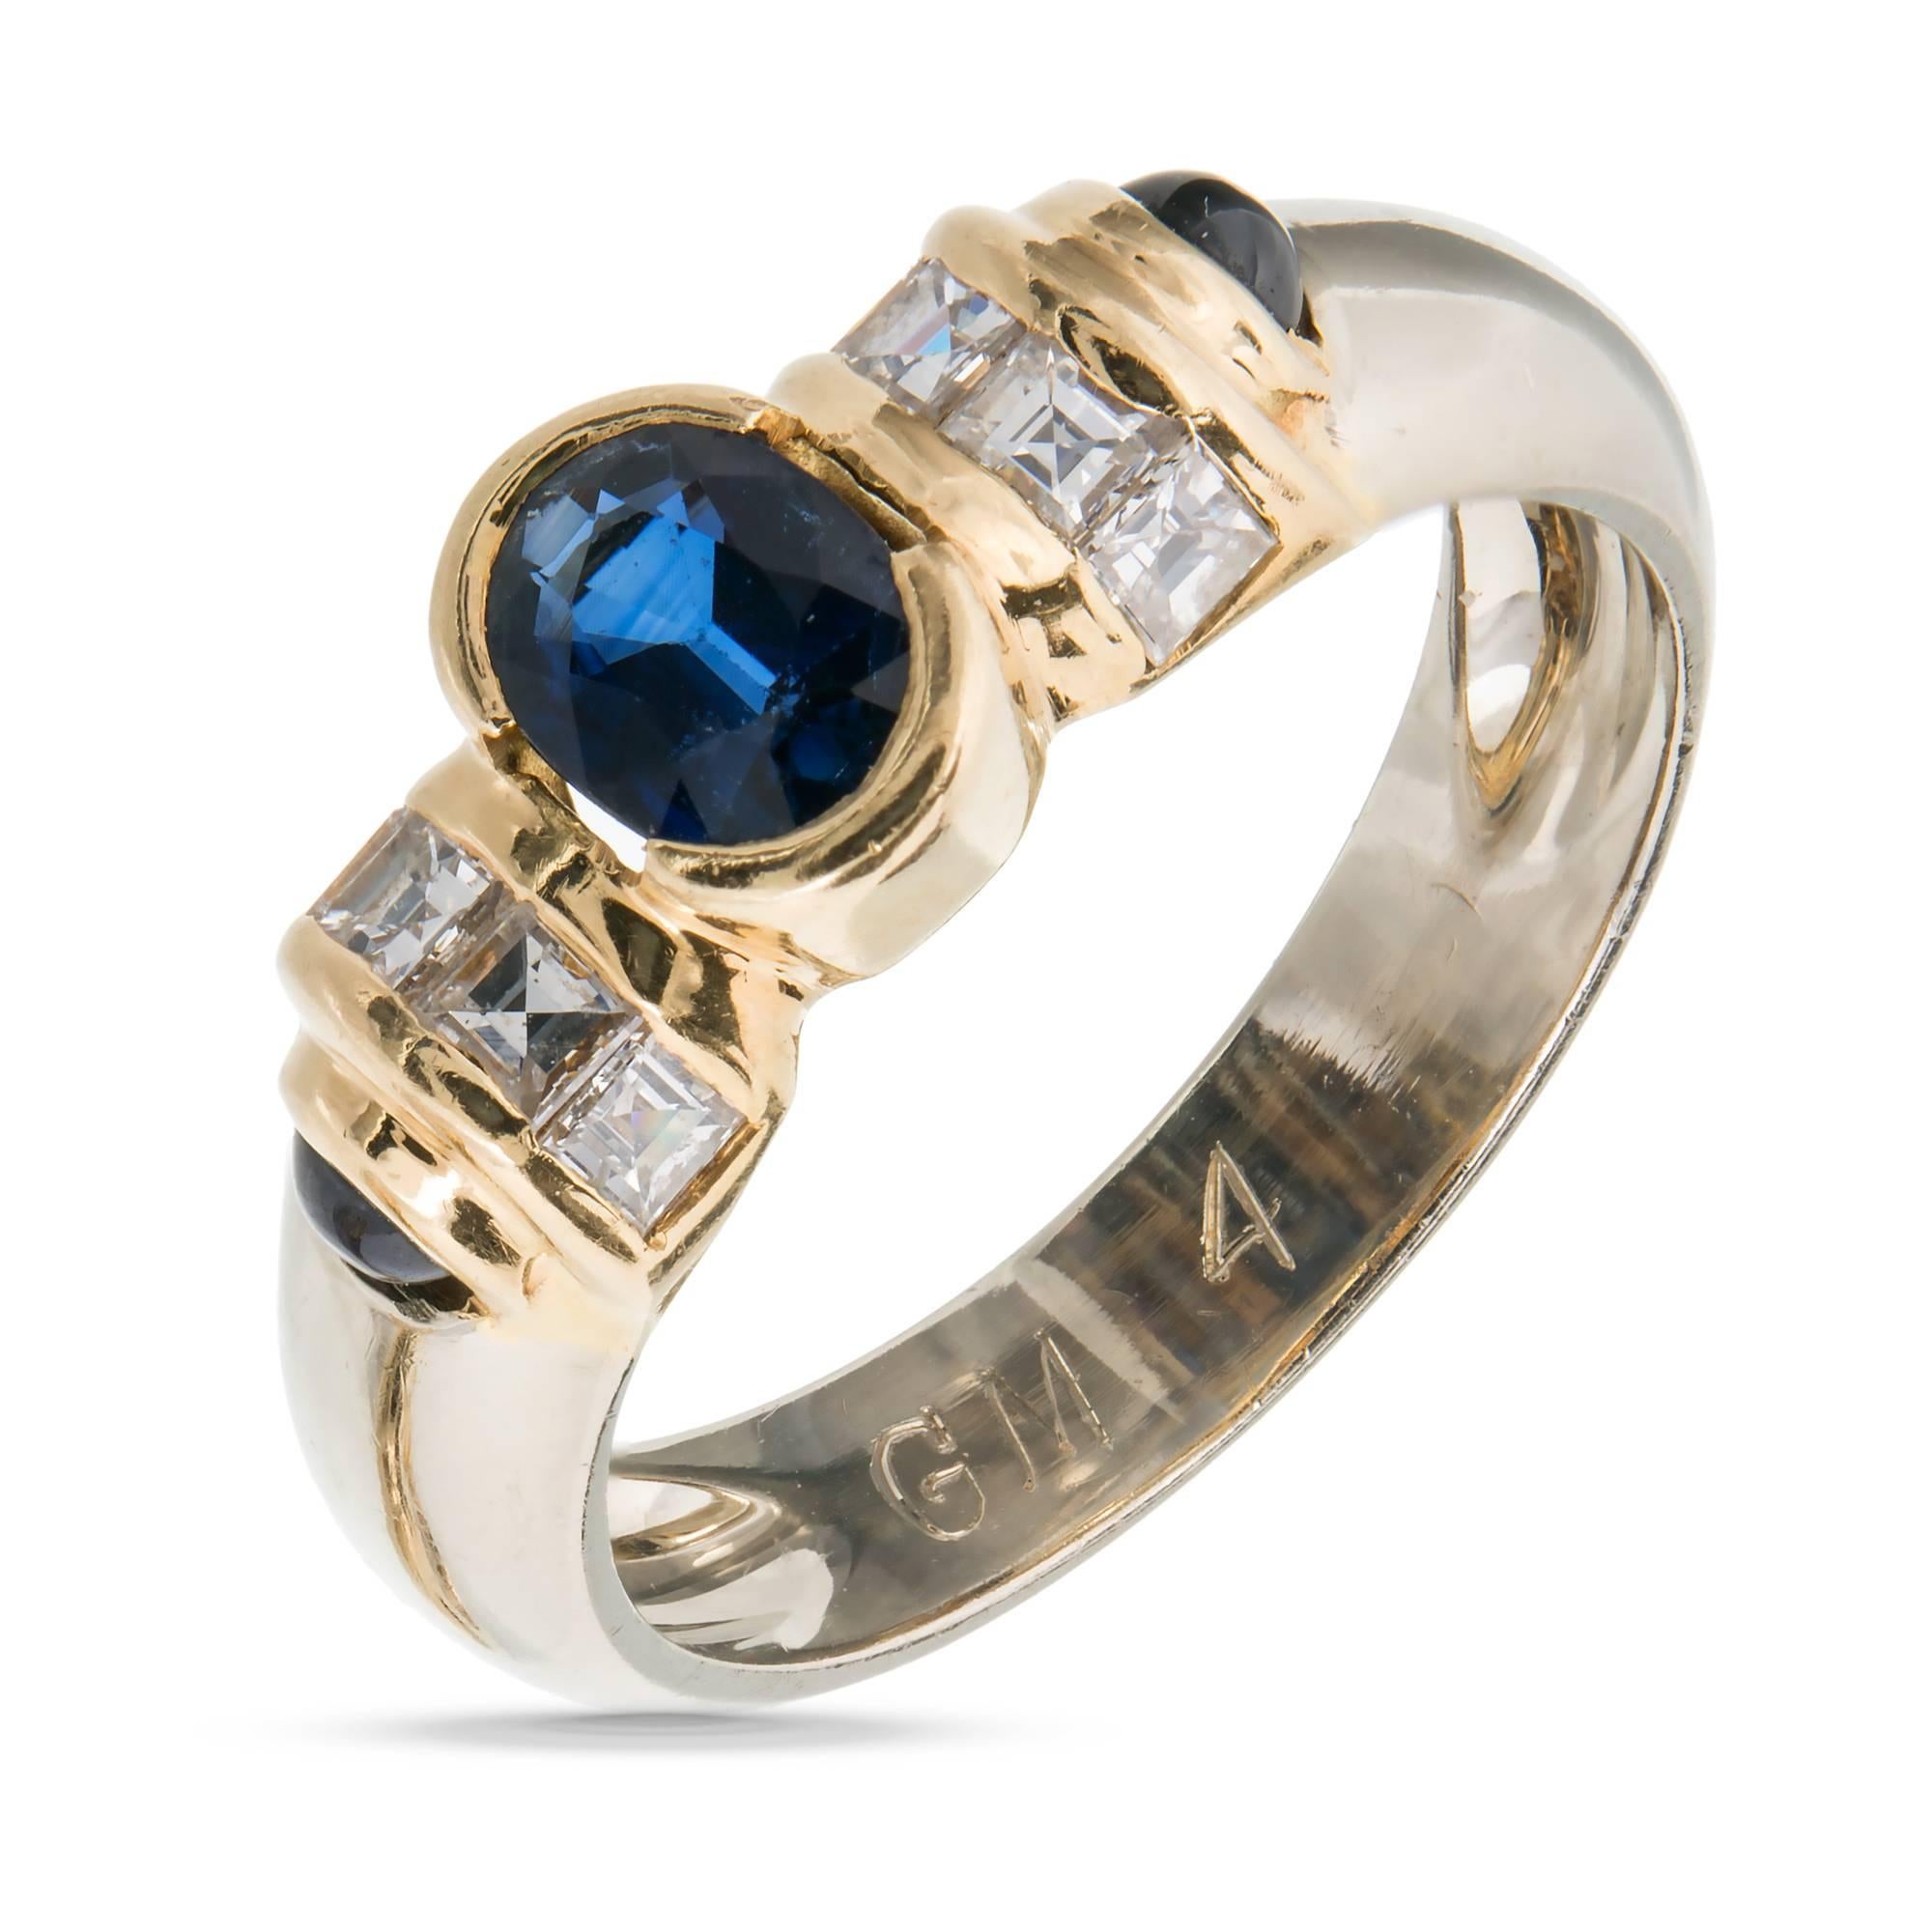 Oval Cabochon Sapphire Square Diamond Gold Engagement Ring

1 6 x 4 oval fine deep blue Sapphire, approx. total weight .60cts
2 2.5mm cabochon deep blue Sapphires
8 square step cut diamonds, approx. total weight .40cts, F, VS
Tested: 18k white gold